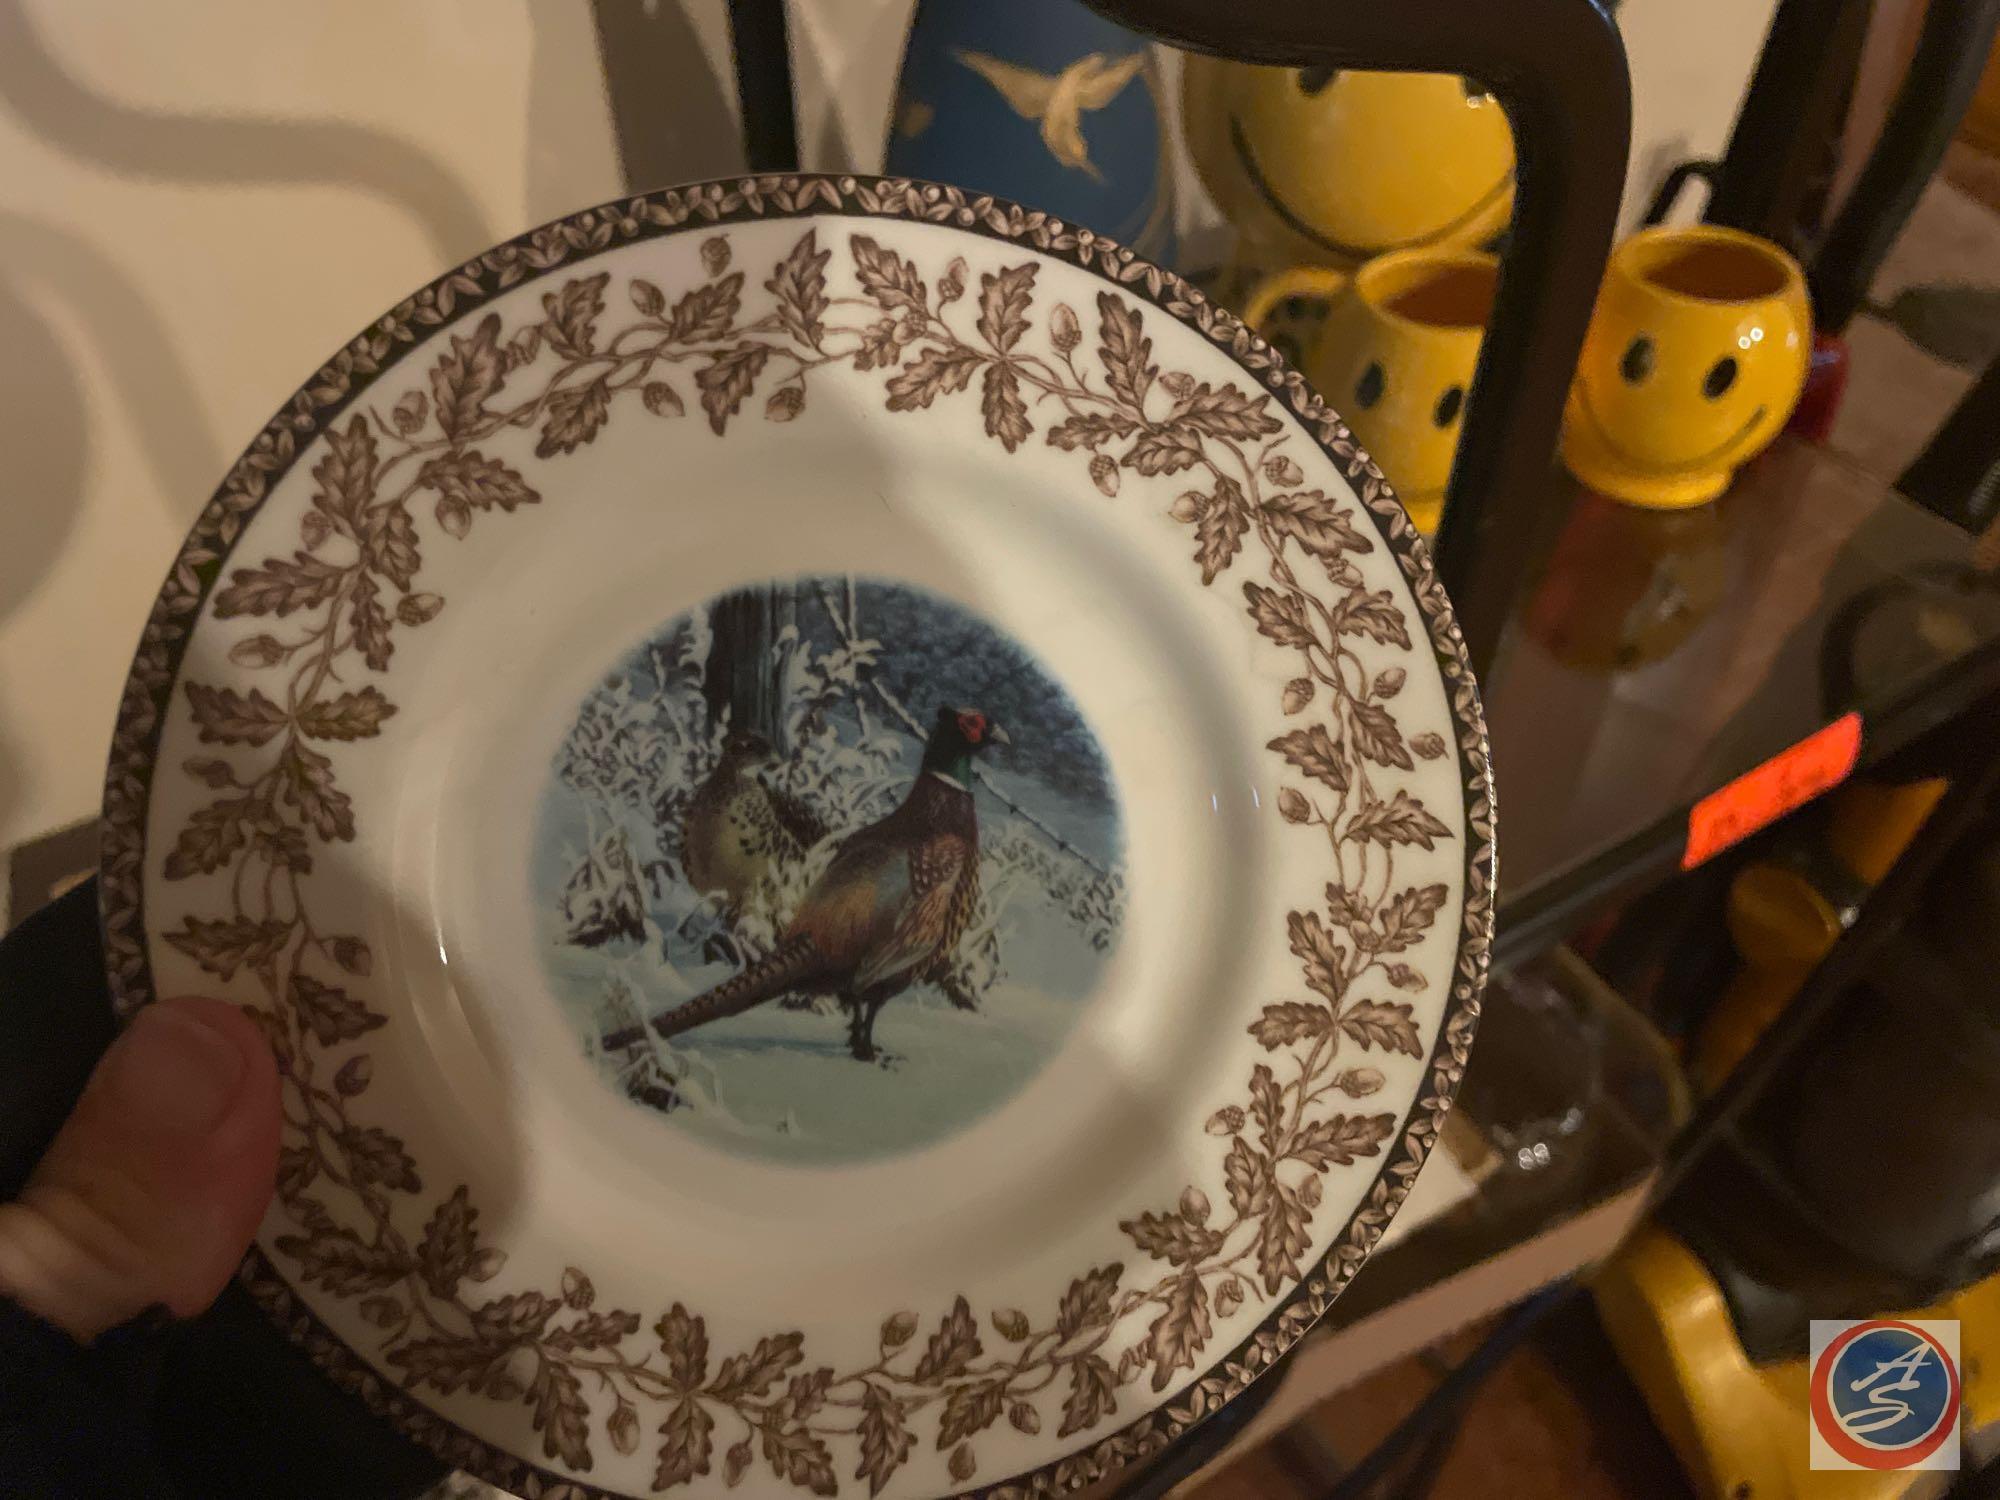 National Wildlife Federation Pheasant Style Dishware Including Cups, Saucers, Cereal Bowls, Salad